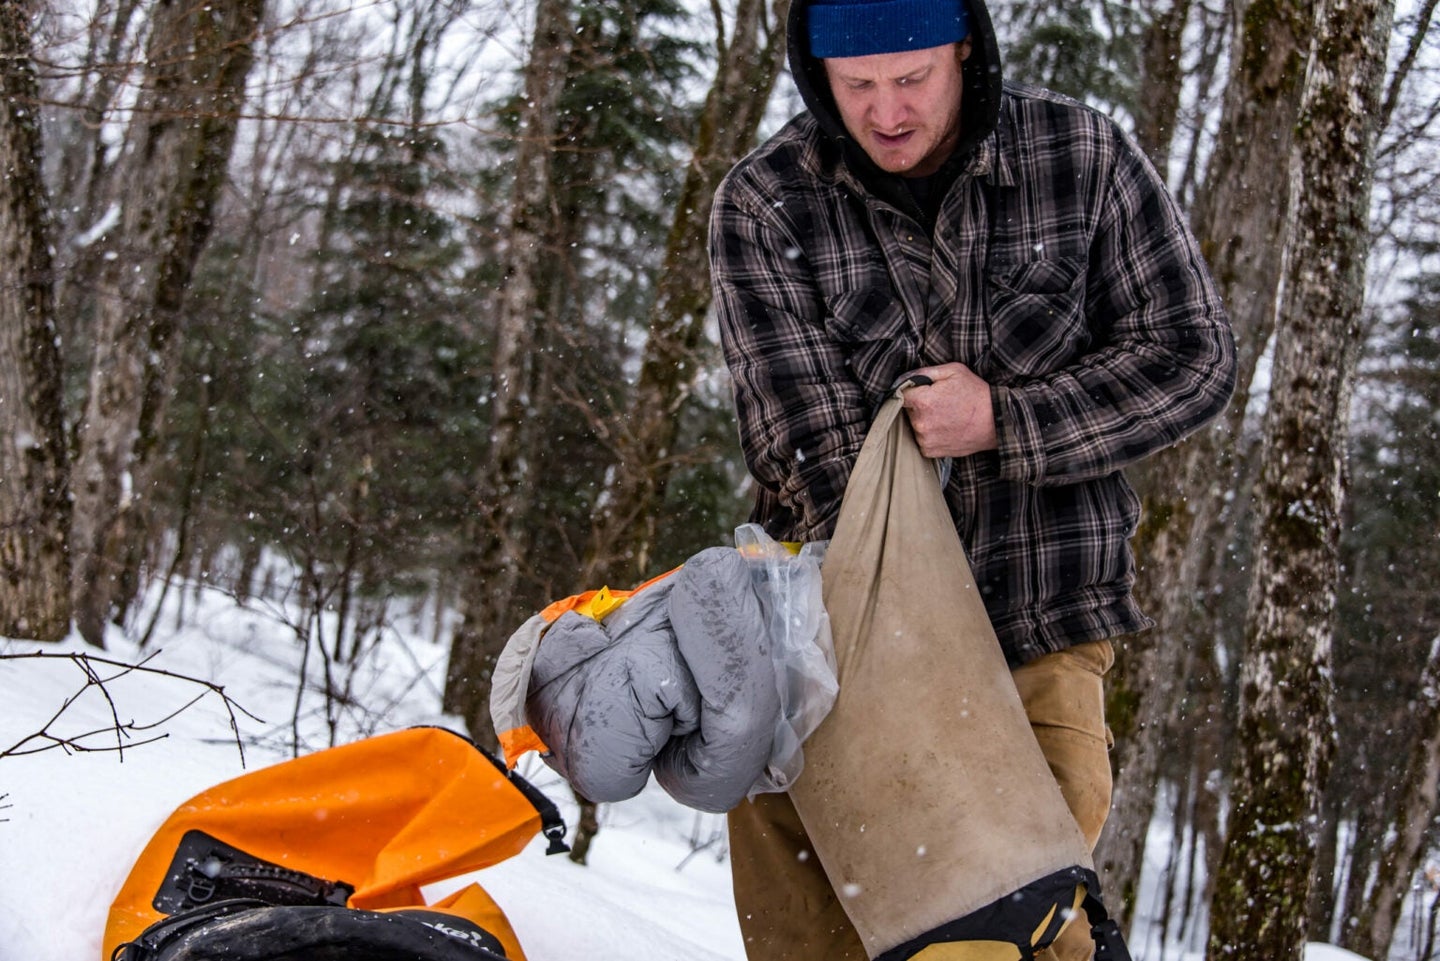 Person stuffing a sleeping bag and plastic bag in a compression bag in the snow